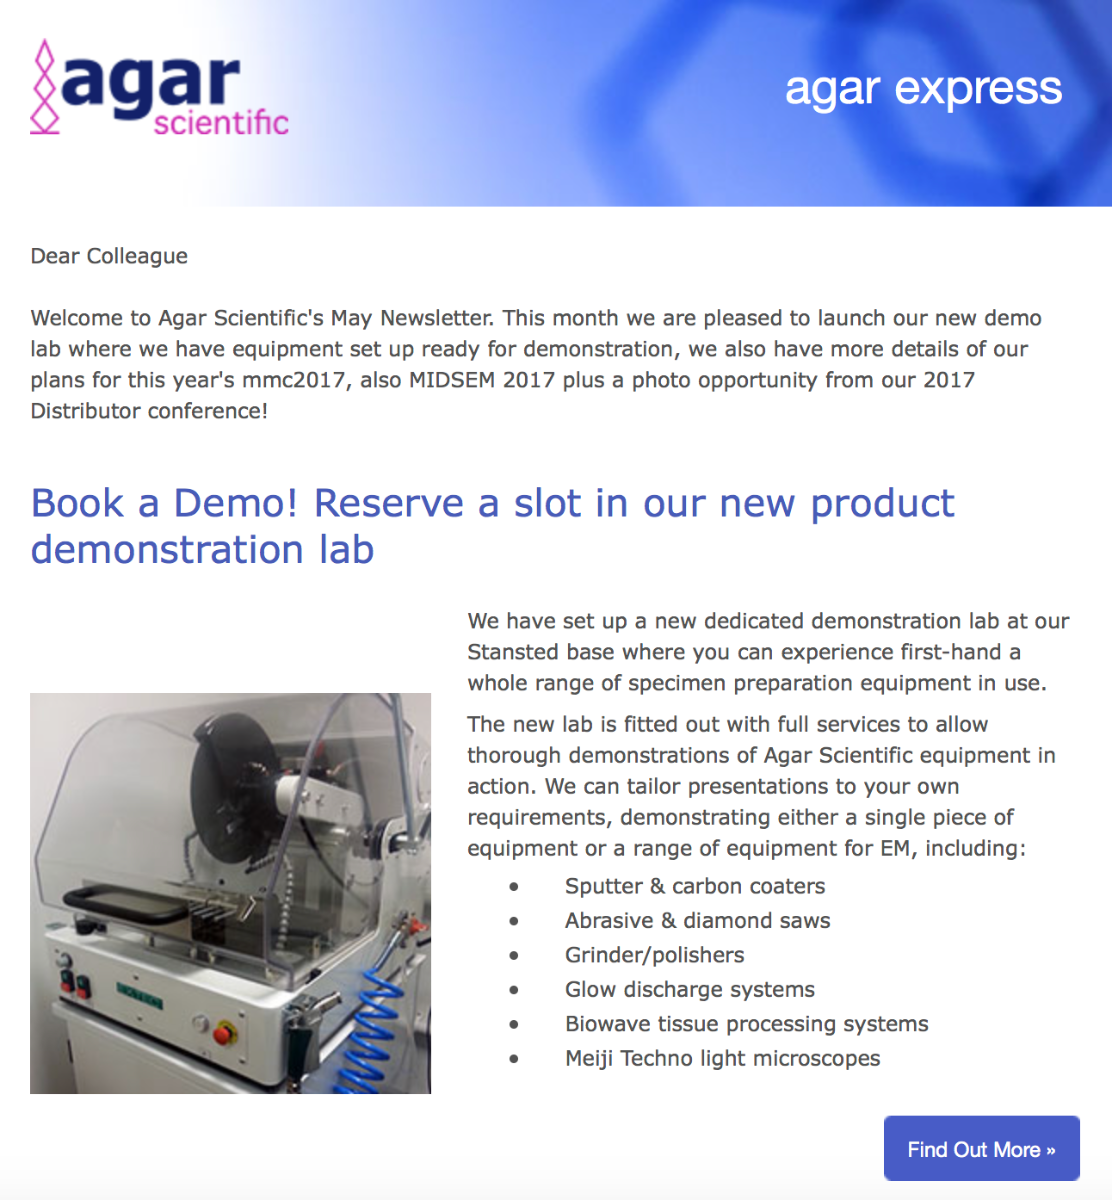 Agar Express May 2017 - we launch our new demo lab, plans for mmc2017 and more...